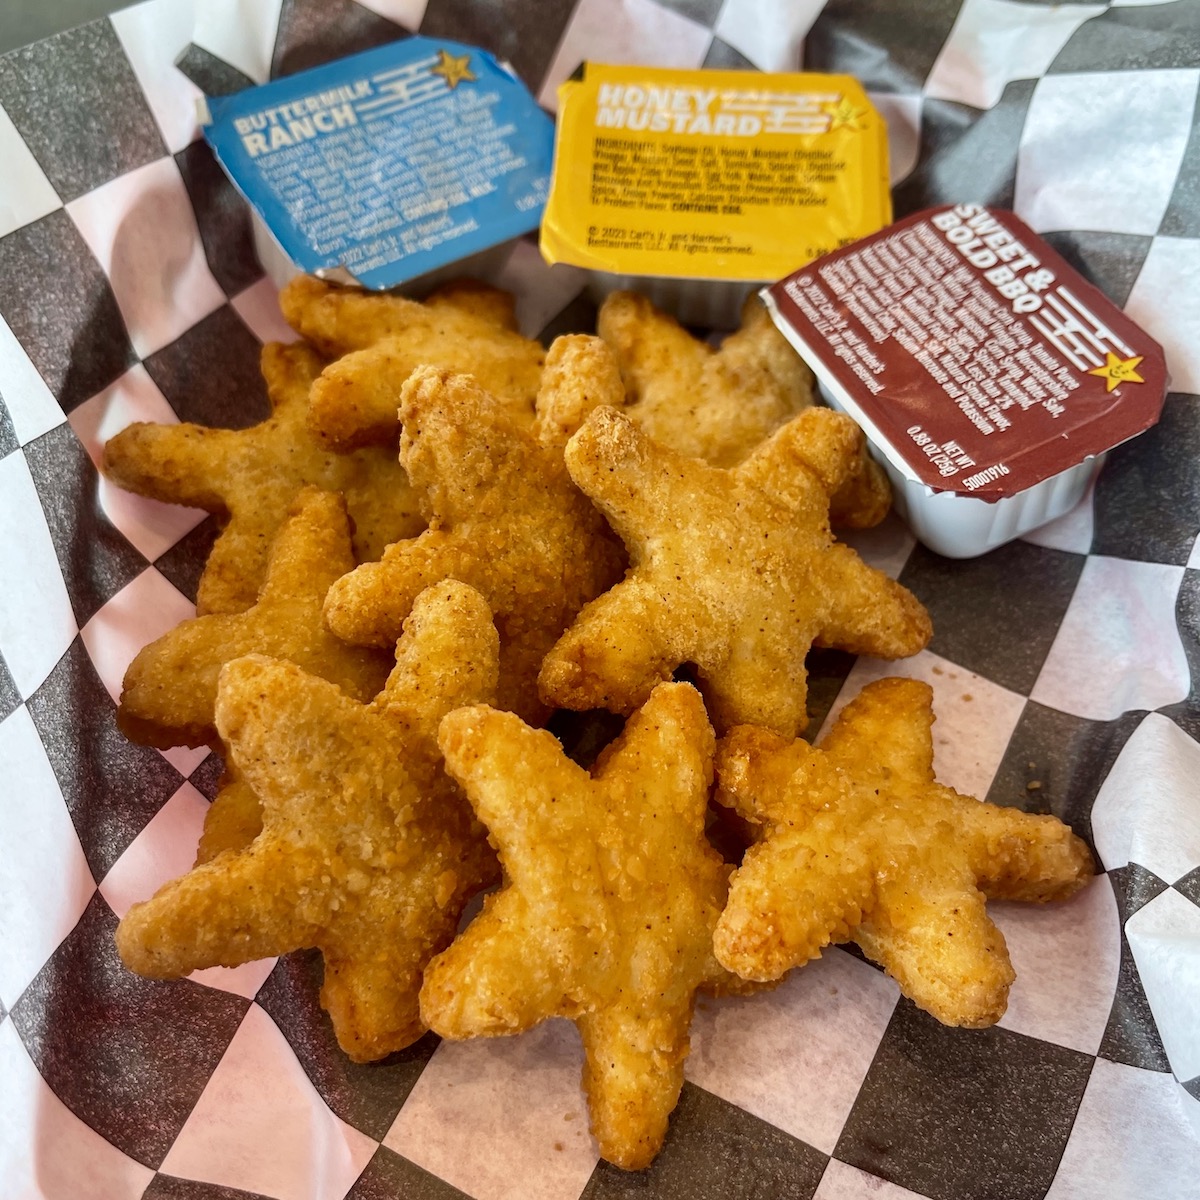 Chicken Stars from Carl's Jr. in Doral, Florida